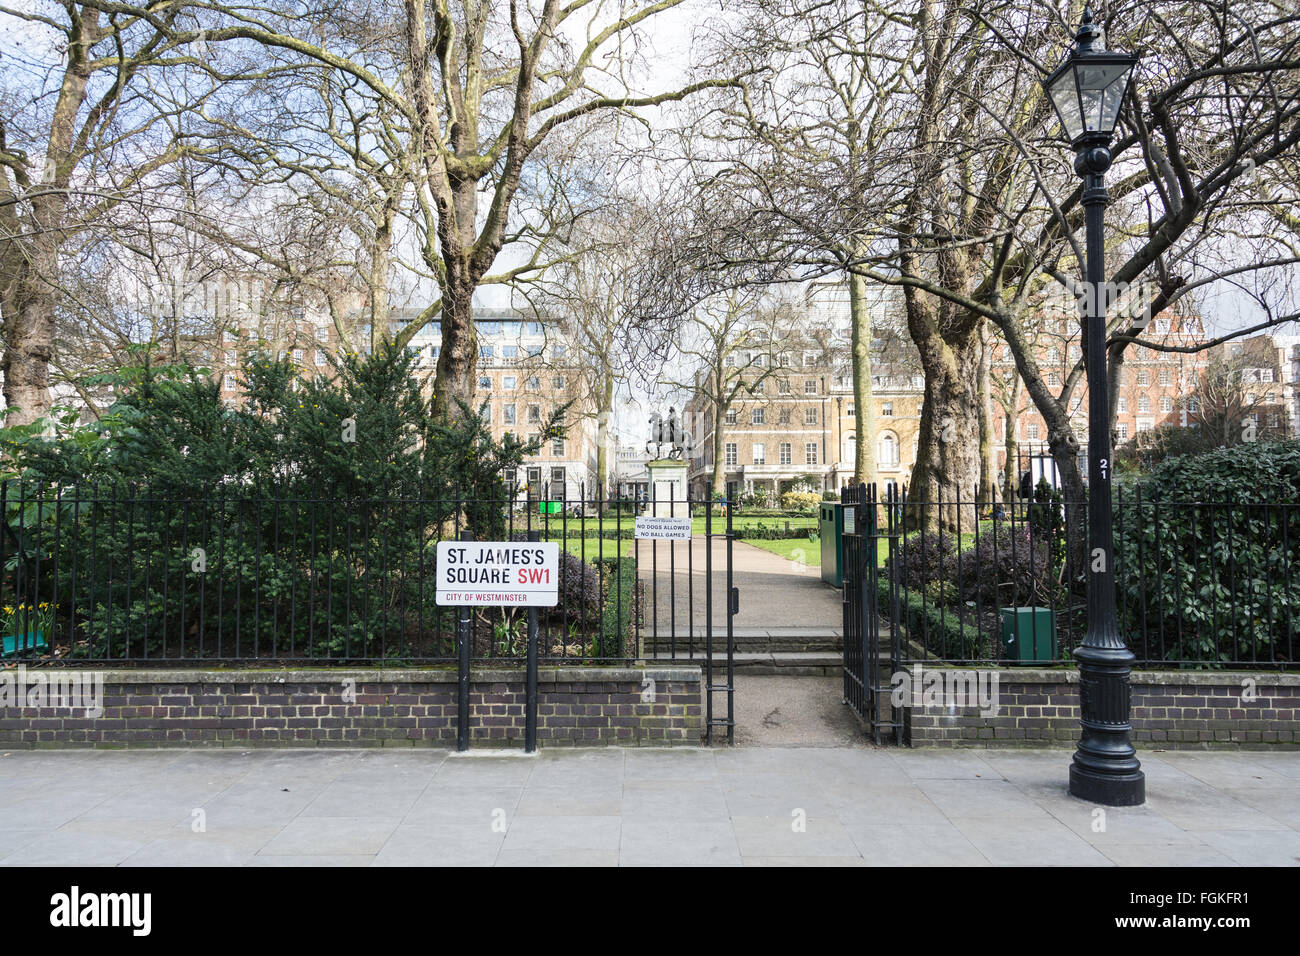 Entrance to St James's Square, a typical London Square with one entrance on each of its sides, London, SW1, UK Stock Photo